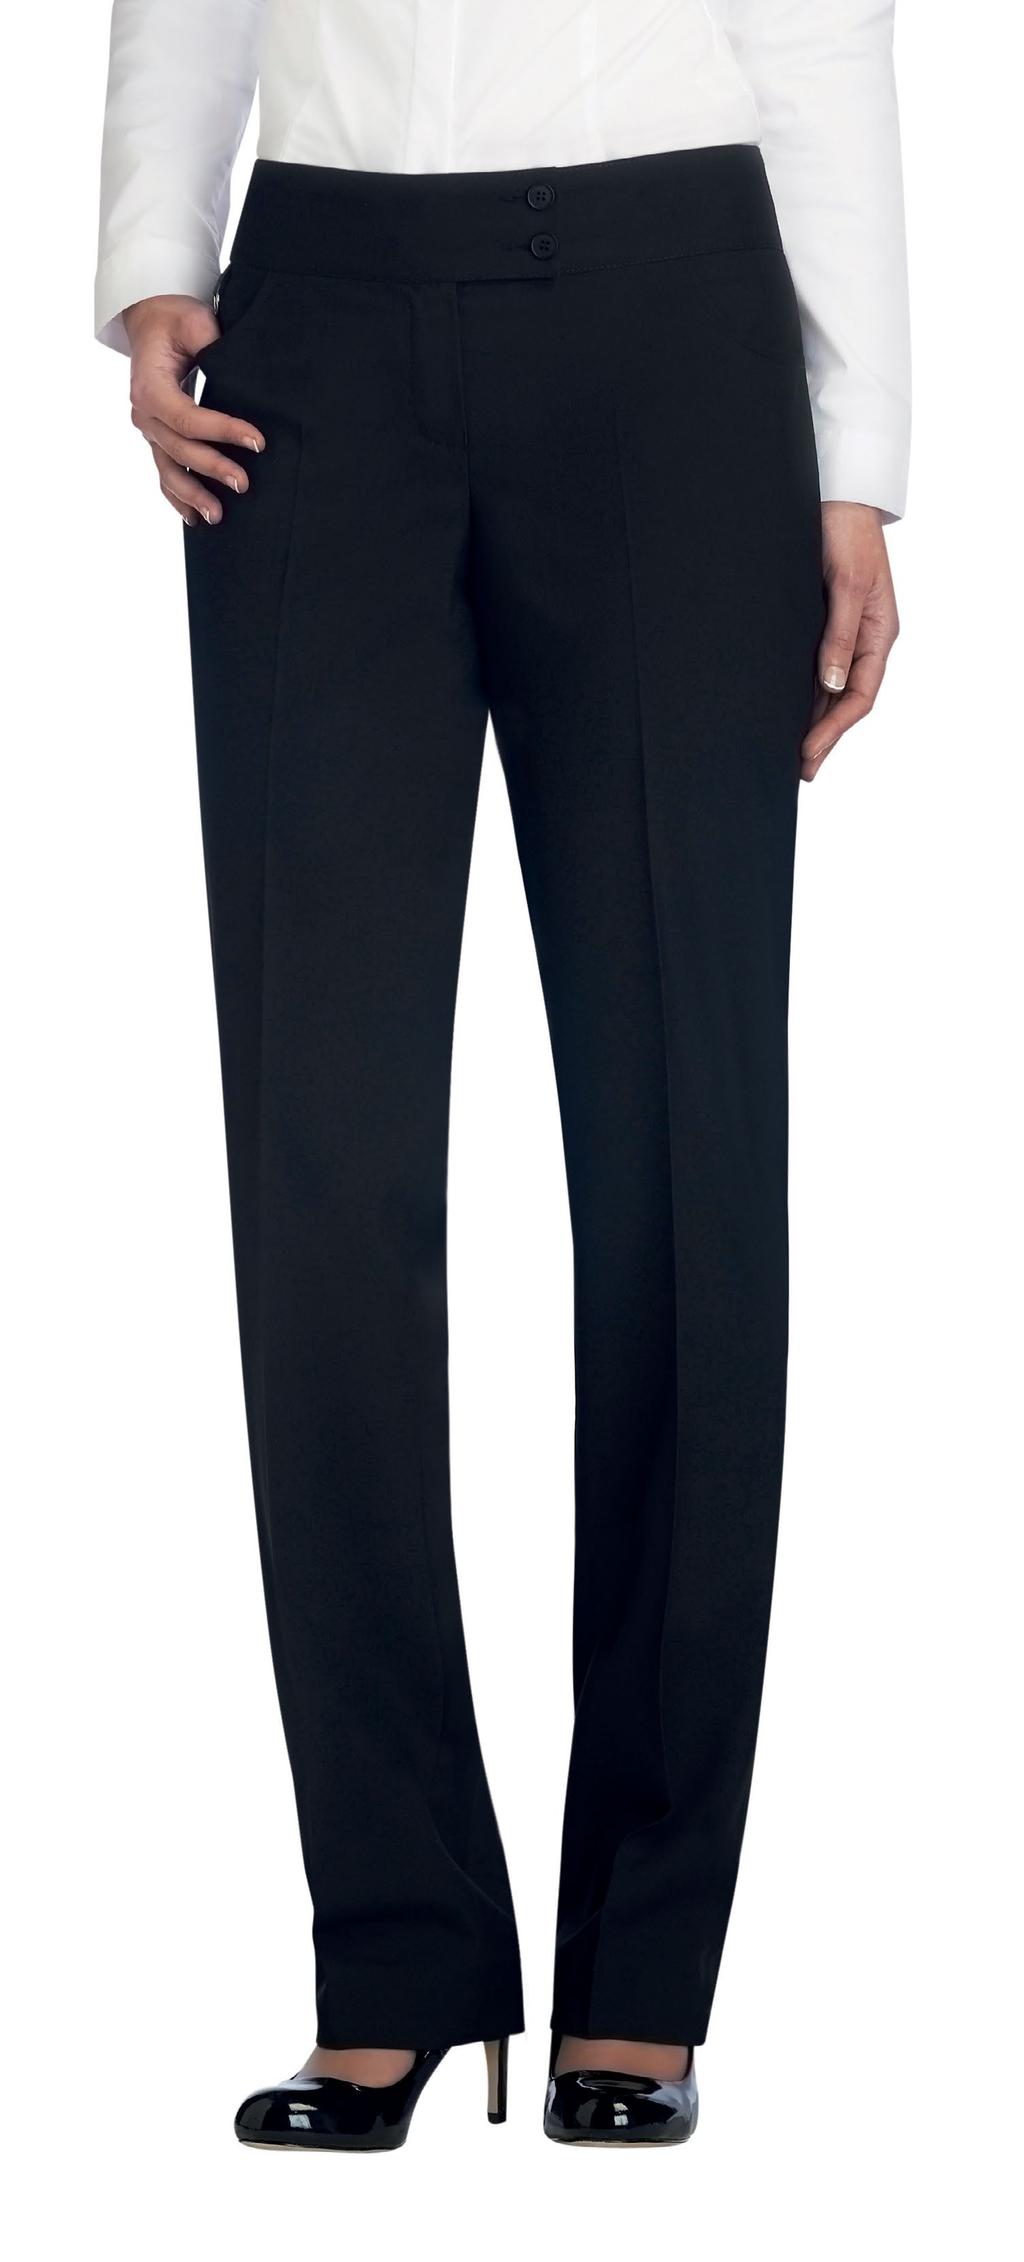 MAIDAVALE TROUSER Modern, narrow parallel leg with a plain front.